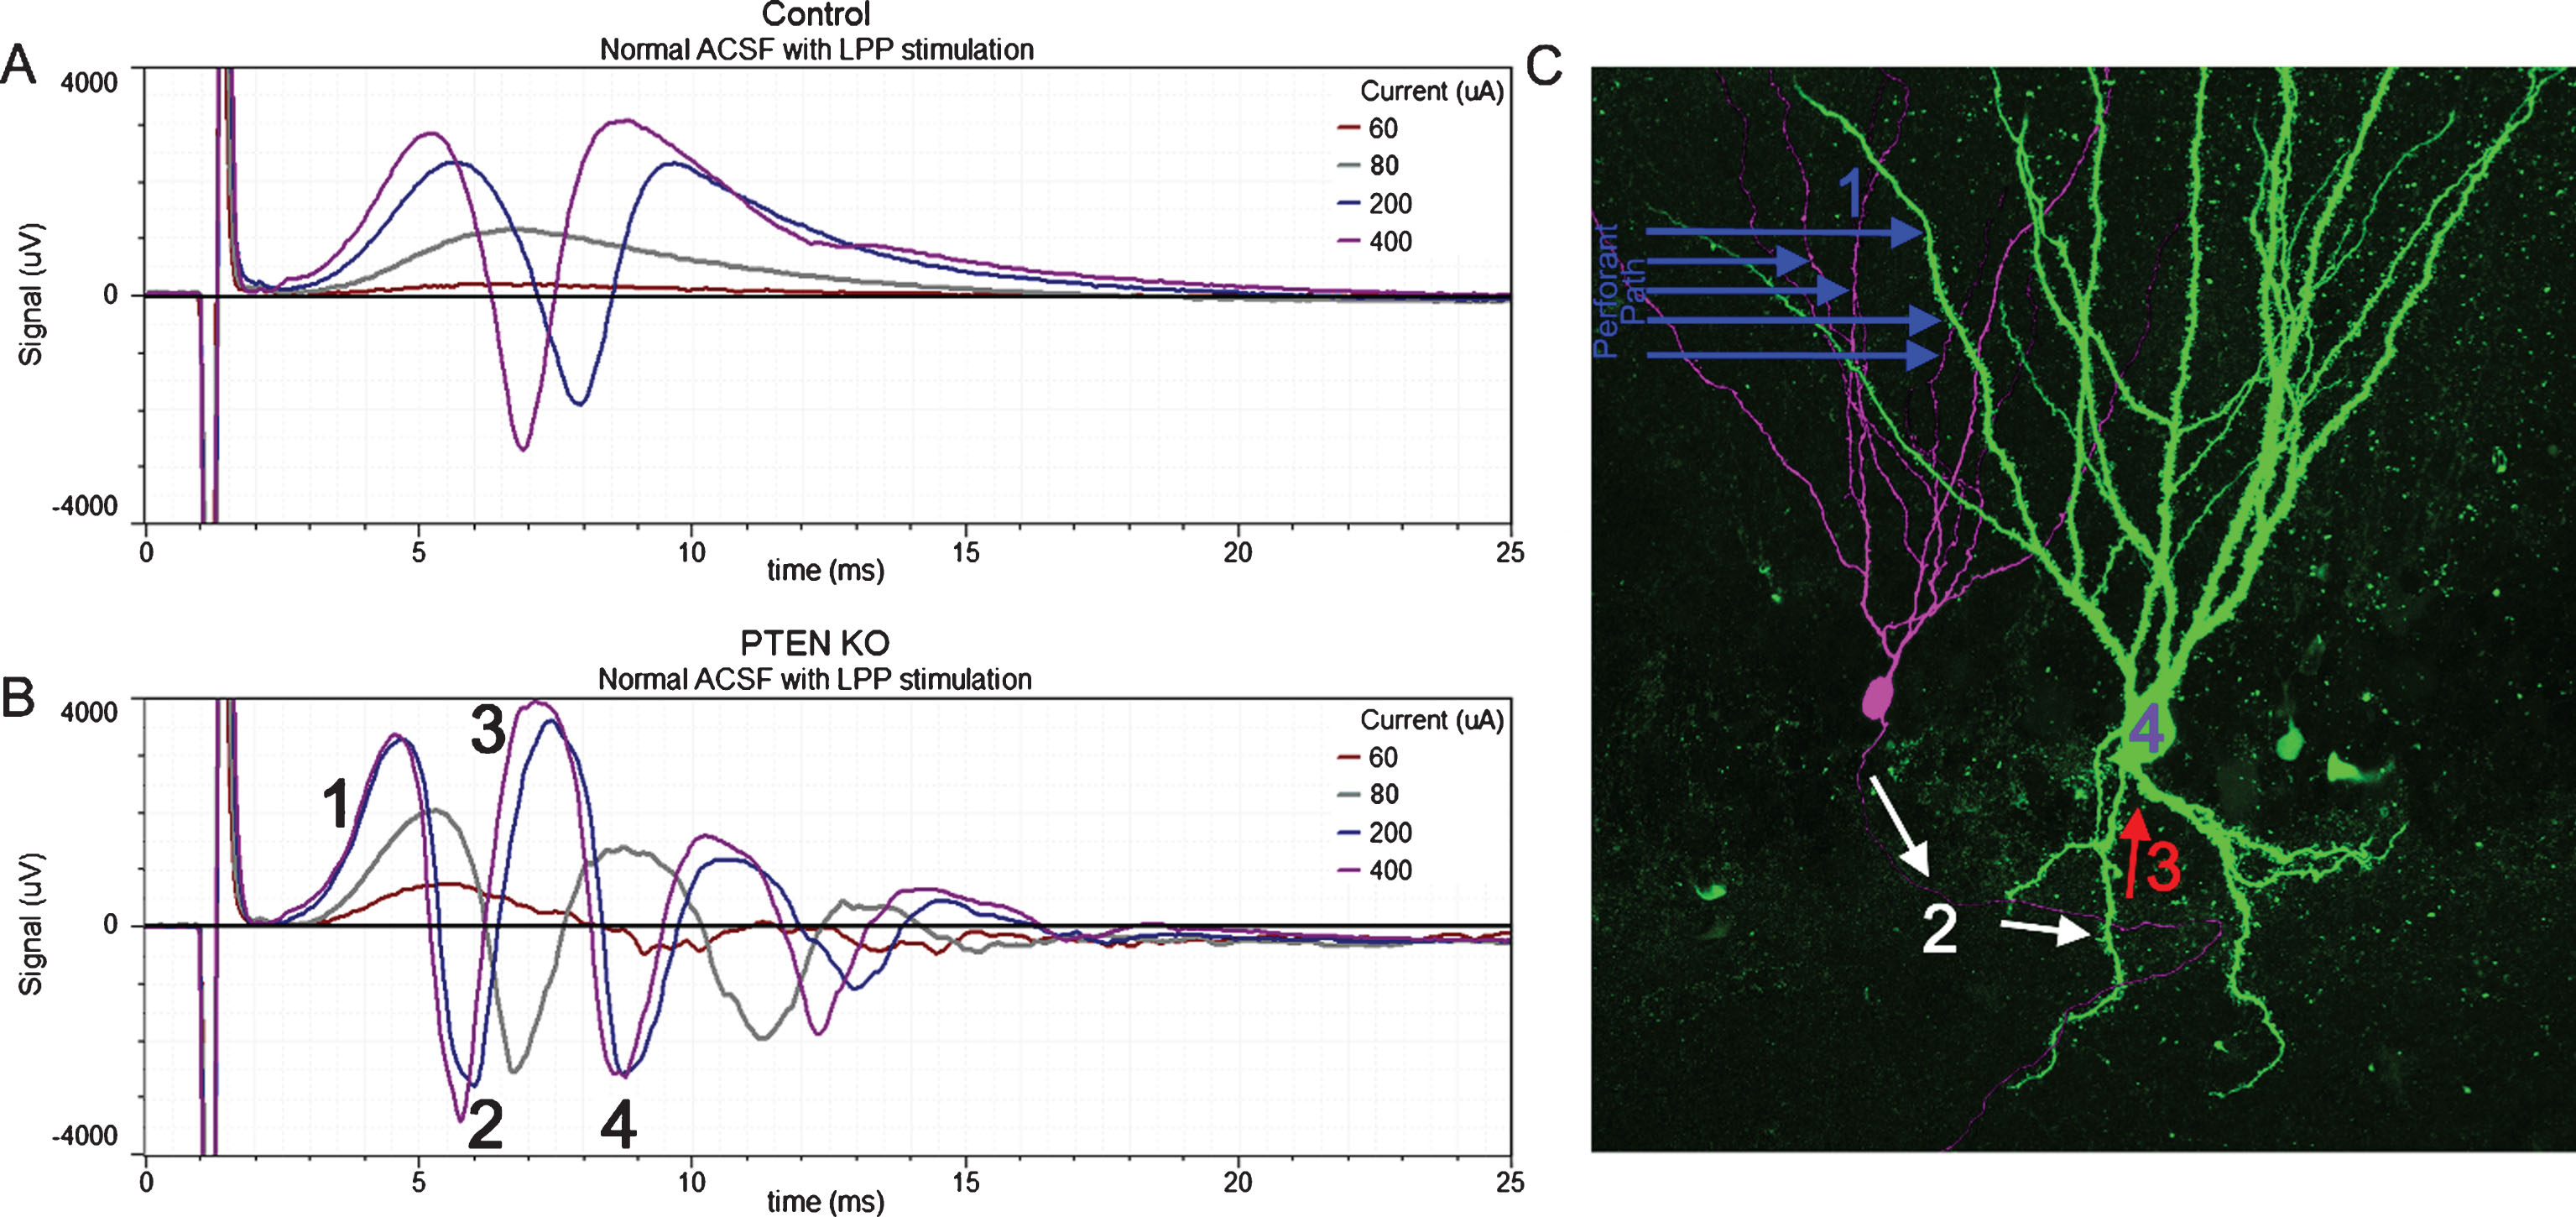 Responses to lateral perforant path (LPP) stimulation of increasing amplitude (60, 80, 200 and 400μA) from a control mouse and a PTEN KO mouse. In slices from the control mouse (A) the field excitatory post-synaptic potential (fEPSP) increased in amplitude with greater stimulation current and was followed by the appearance of a single population spike (negative going event) once threshold was reached. The slice from the PTEN KO mouse (B) also showed increasing fEPSP slope with increasing current, however, multiple population spikes were evoked. C: Hypothesized mechanism for the generation of multiple population spikes. Perforant path stimulation evokes an fEPSP in granule cell dendrites (1) leading to a population spike (2) which creates a secondary fEPSP in a granule cell basal dendrite (3). This recurrent activation provokes a secondary population spike (4). Portions of this image are reprinted from LaSarge et al. [54].